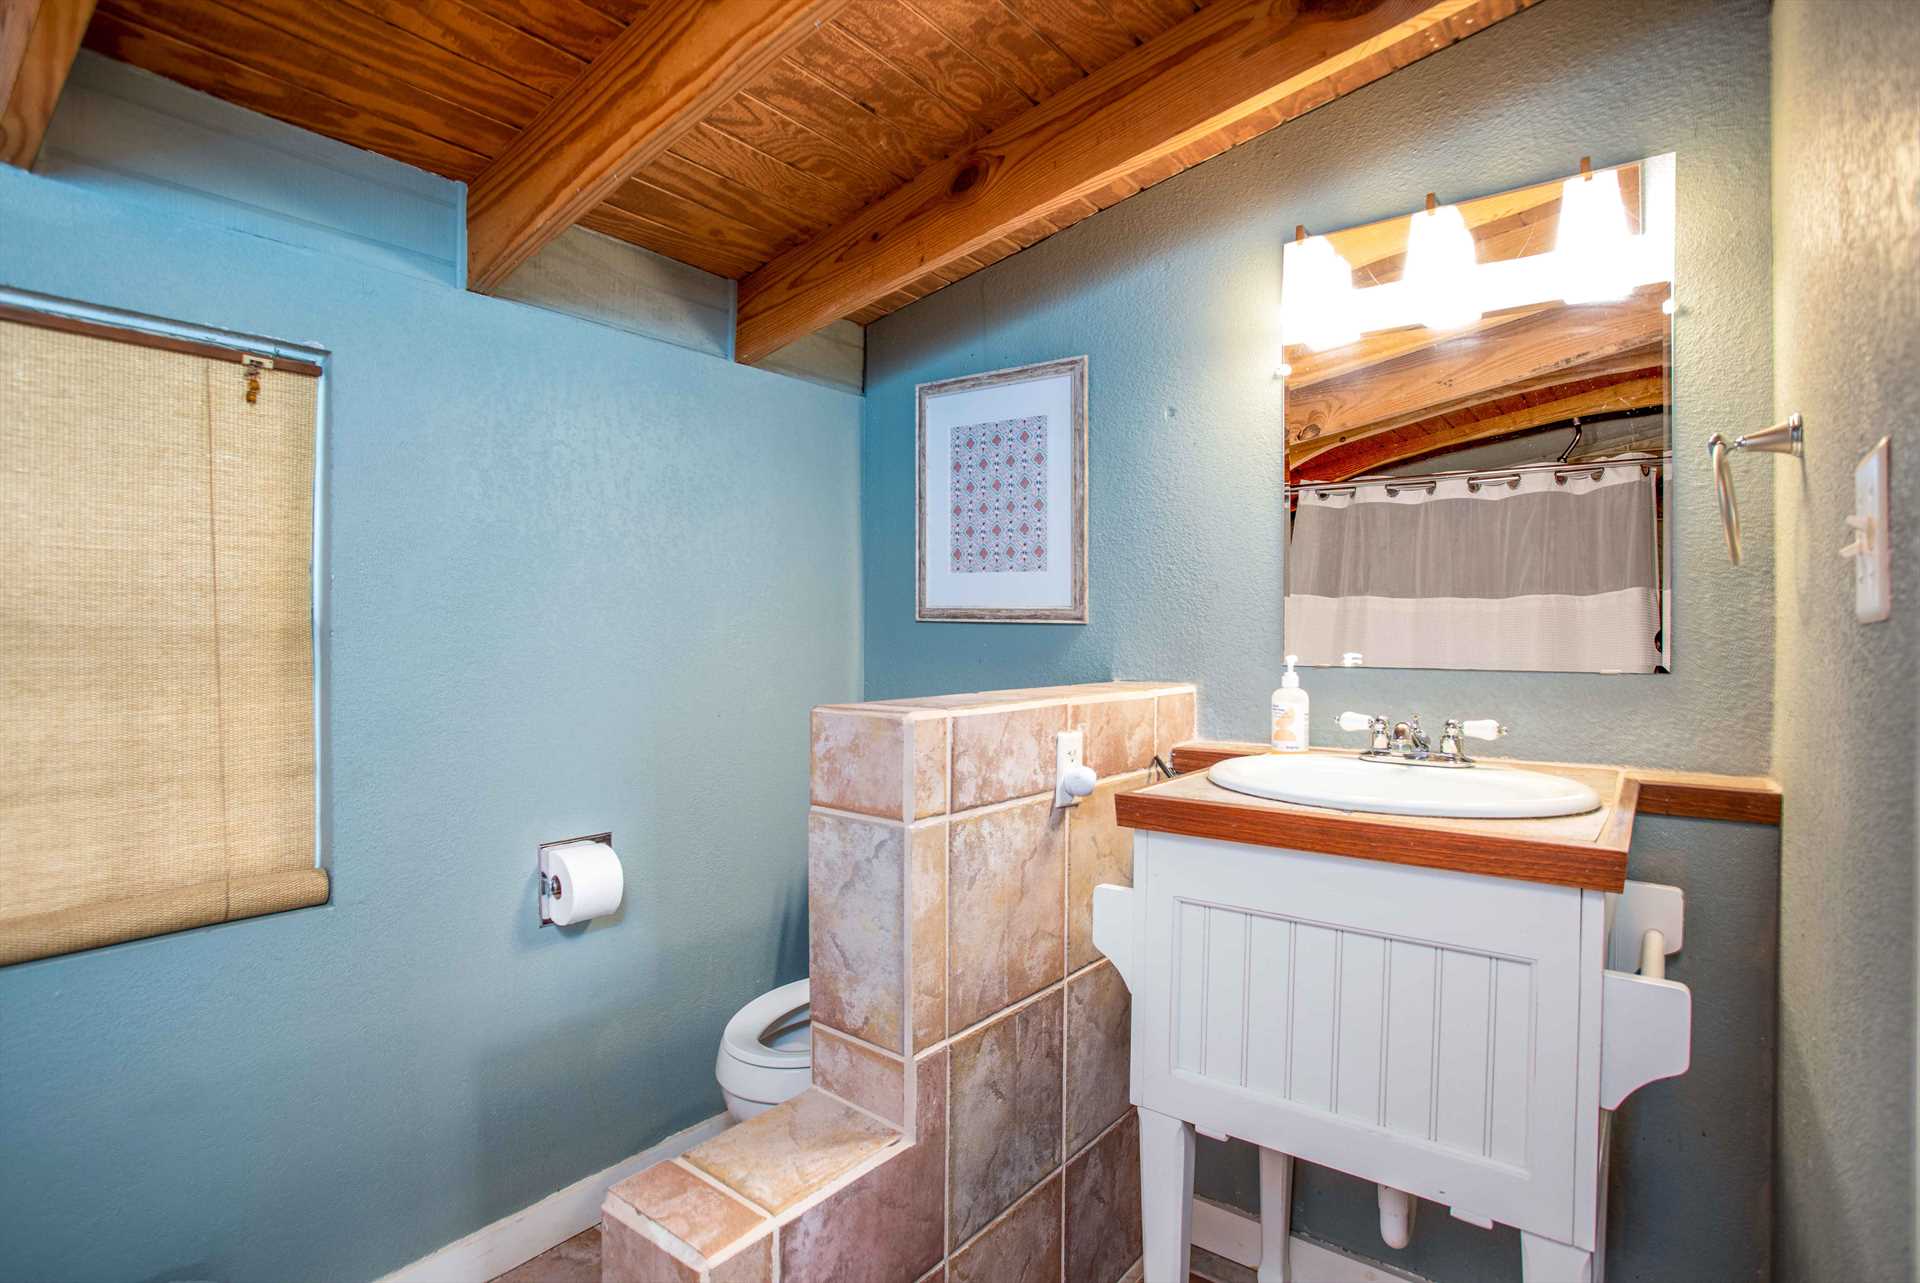                                                 Next to the vanity in the second bathroom, you'll find a convenient half-wall where you can keep your toiletries!